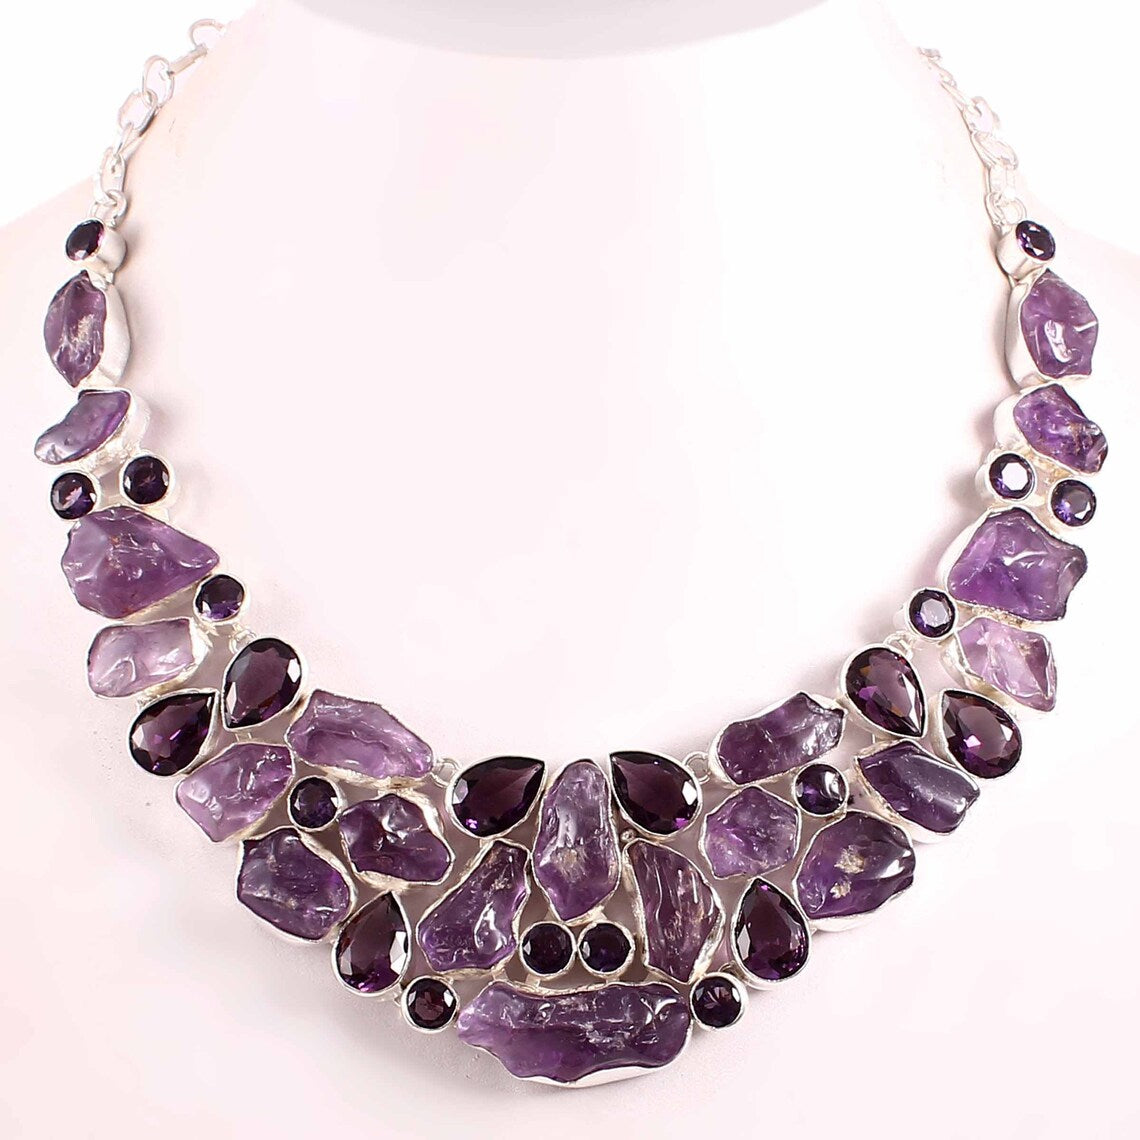 Natural Raw Amethyst Bib Necklace For Women - 925 Sterling Silver Wedding Necklace